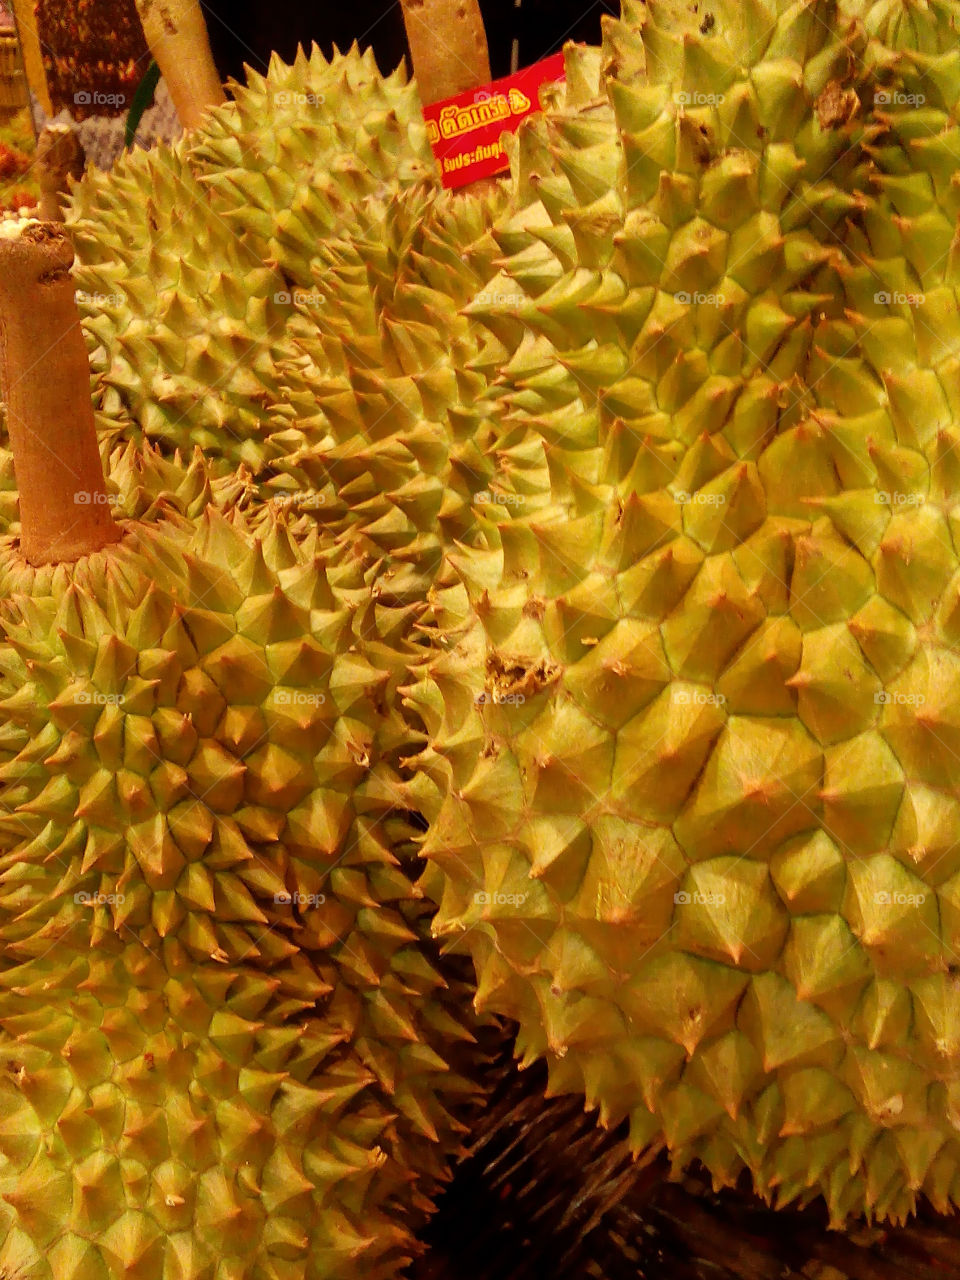 durian. regrarded by many people in southeast asia as the "king of fruits"